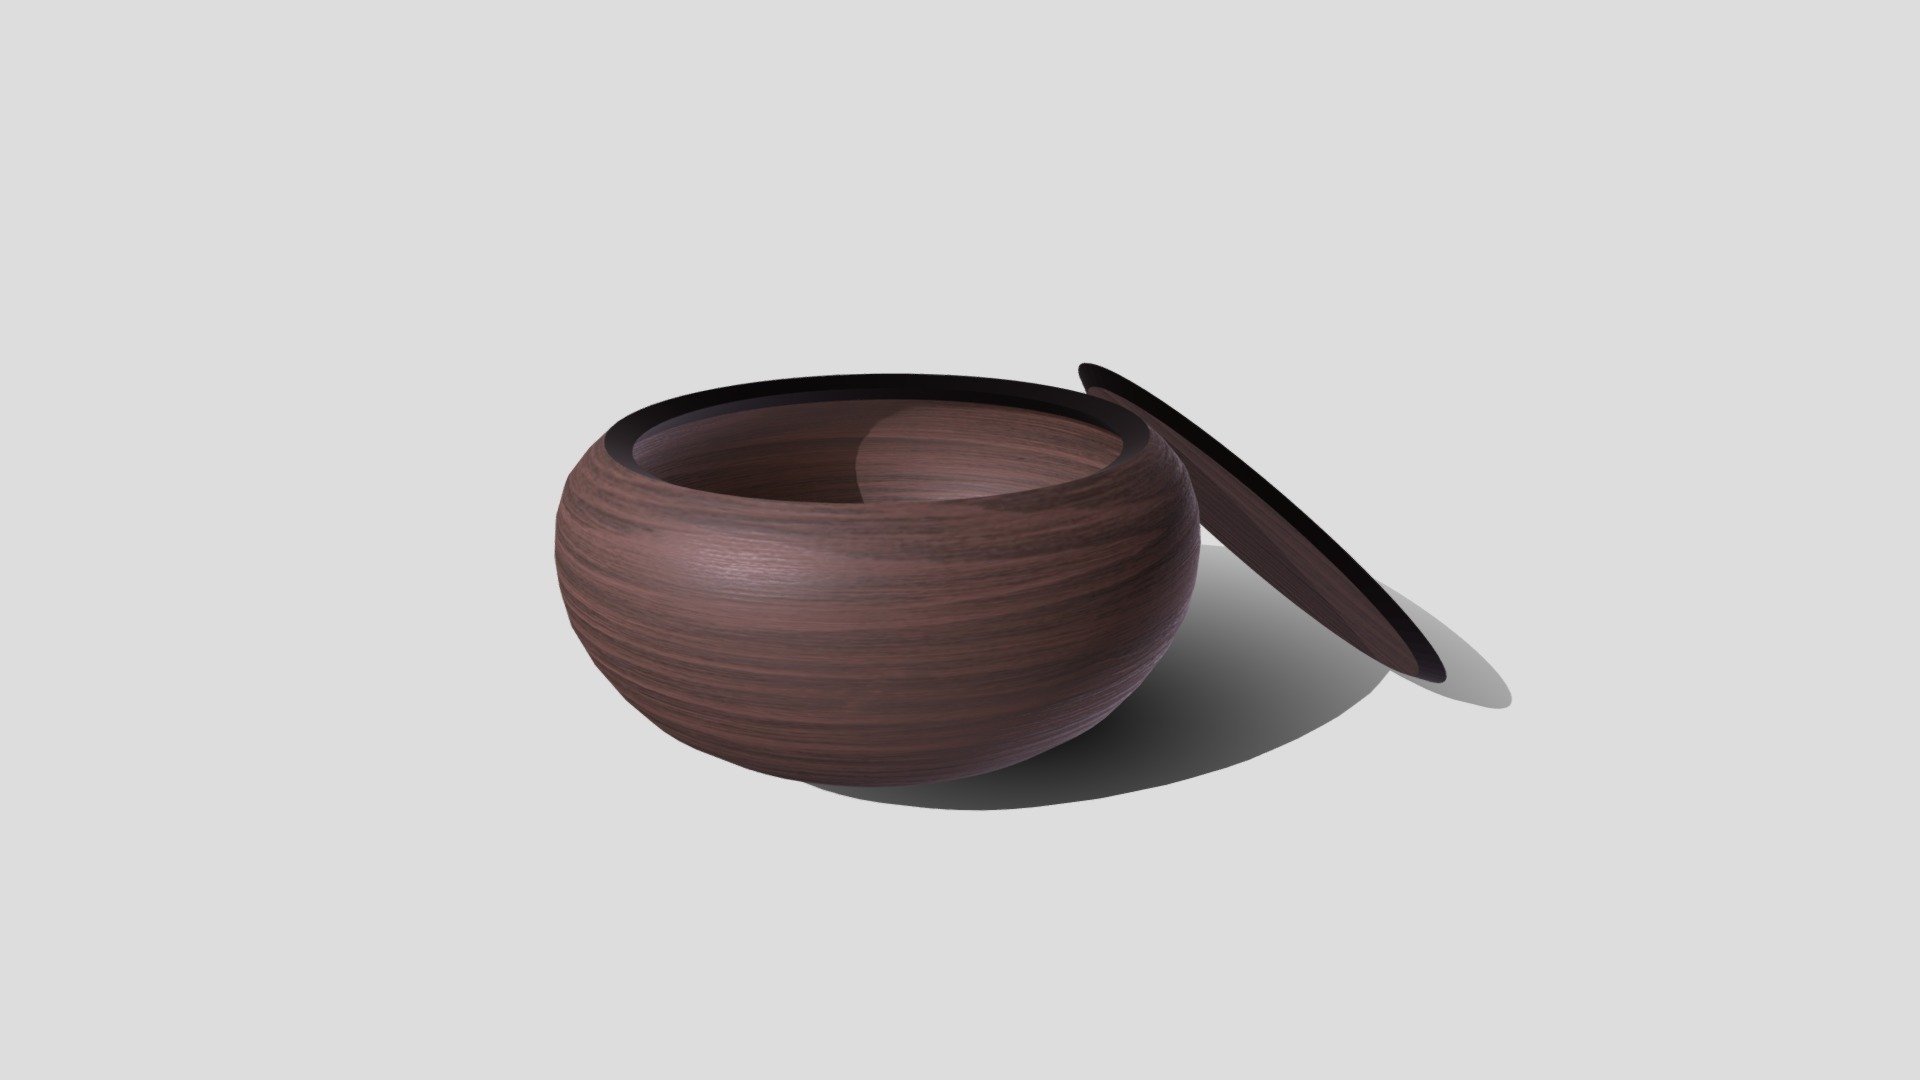 BOWL AND LID - mnr0009

triangle: 3964 (!)

materials: 1/object

FAST UV-mapped | non-overlapping


FILE-FORMAT: .glTF

...................................................... 3d model